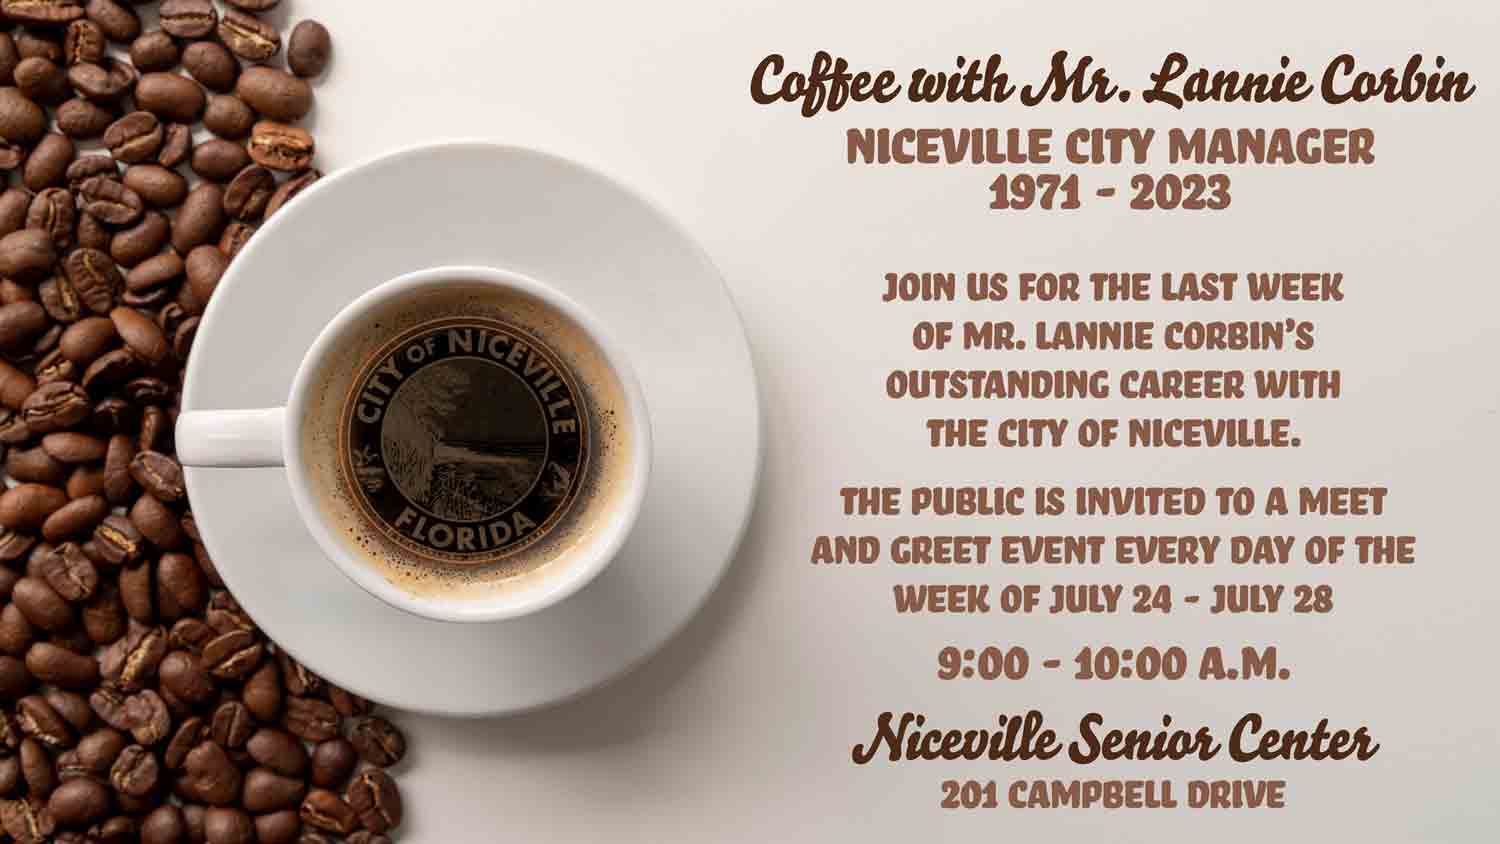 poster promoting coffee event